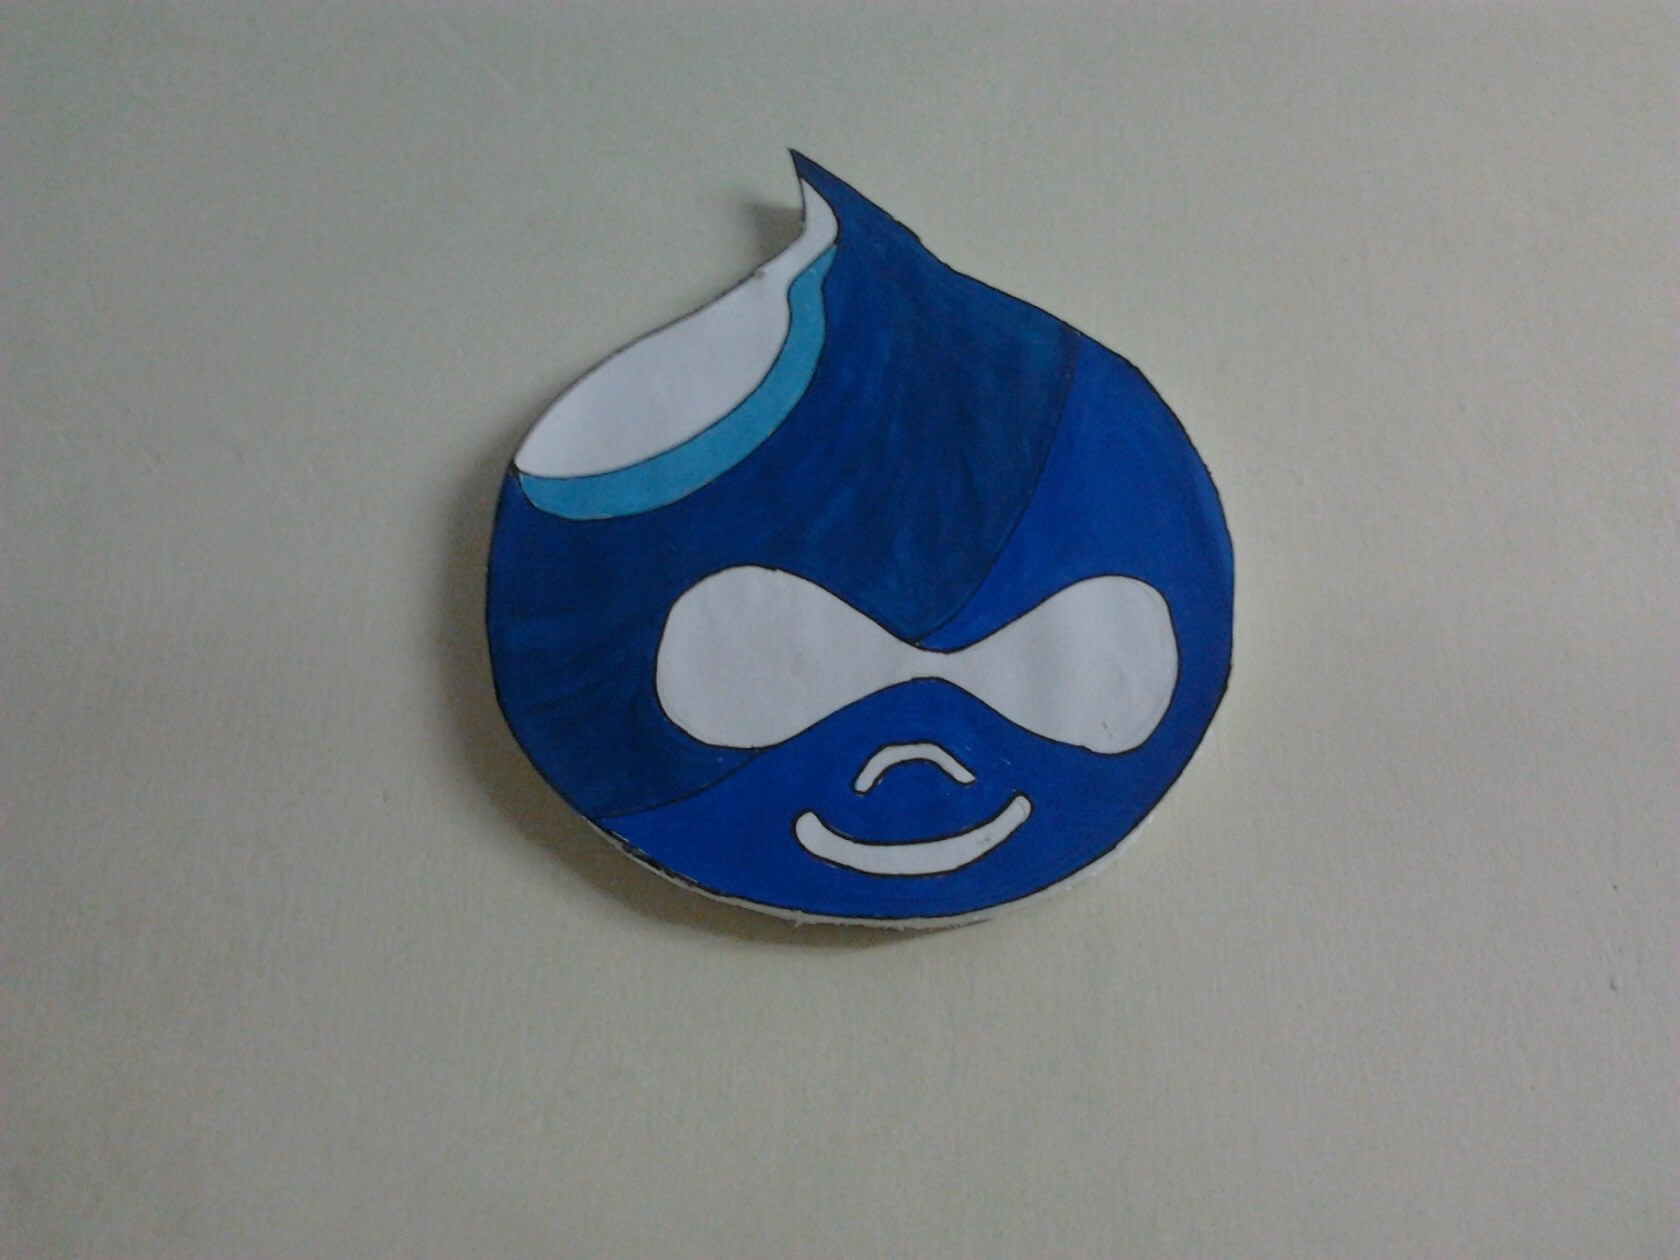 Drive-by cryptominer found in hundreds of unpatched Drupal sites